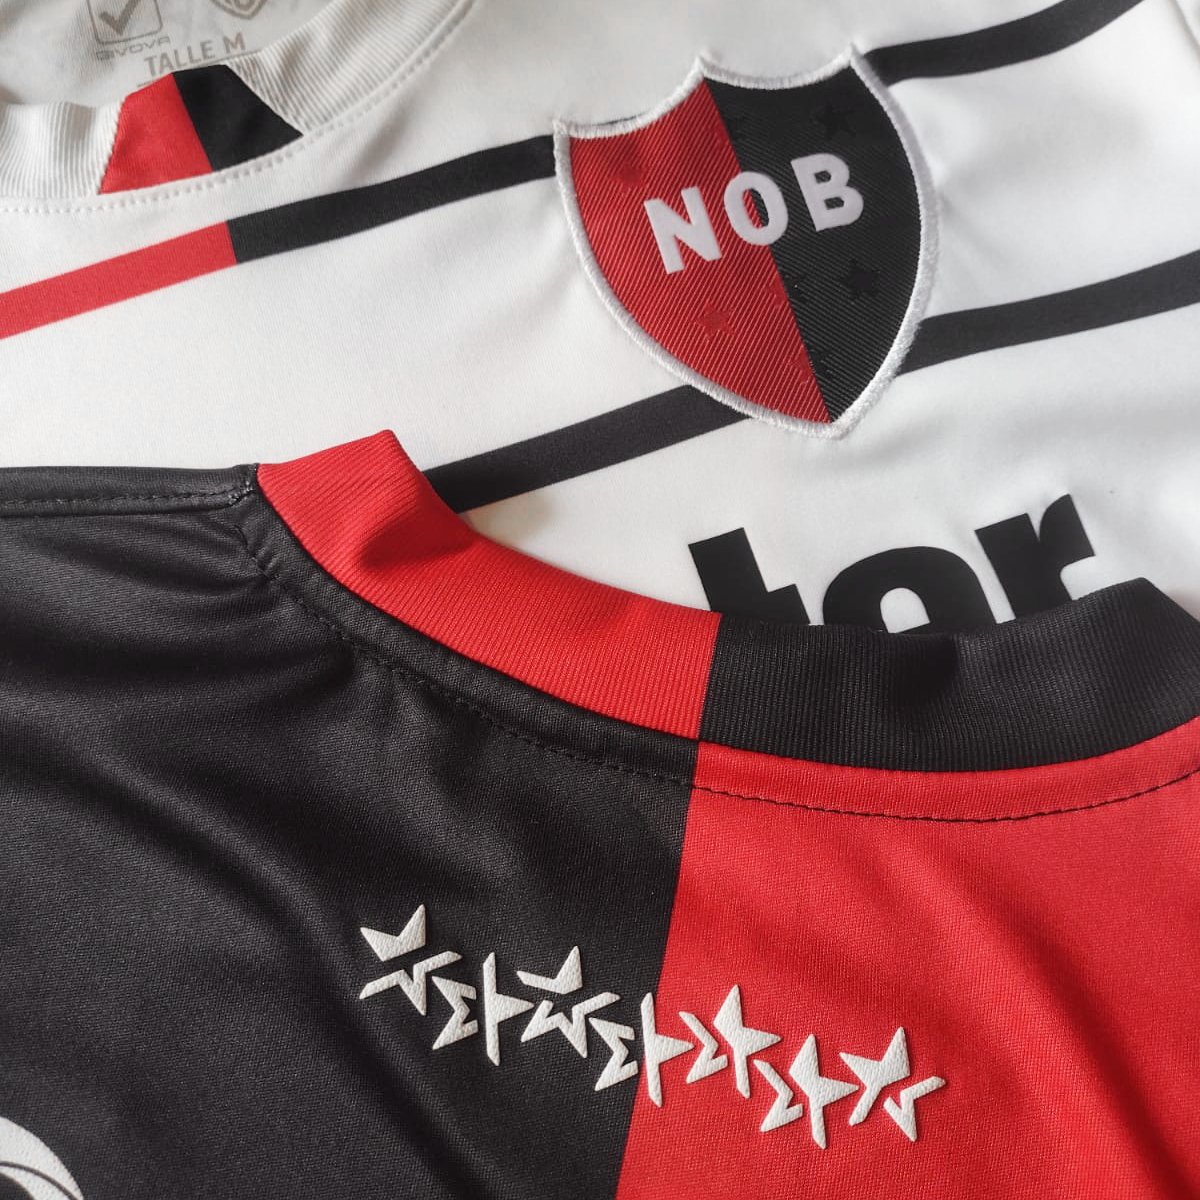 Details Newell's Old Boys voetbalshirts 2022